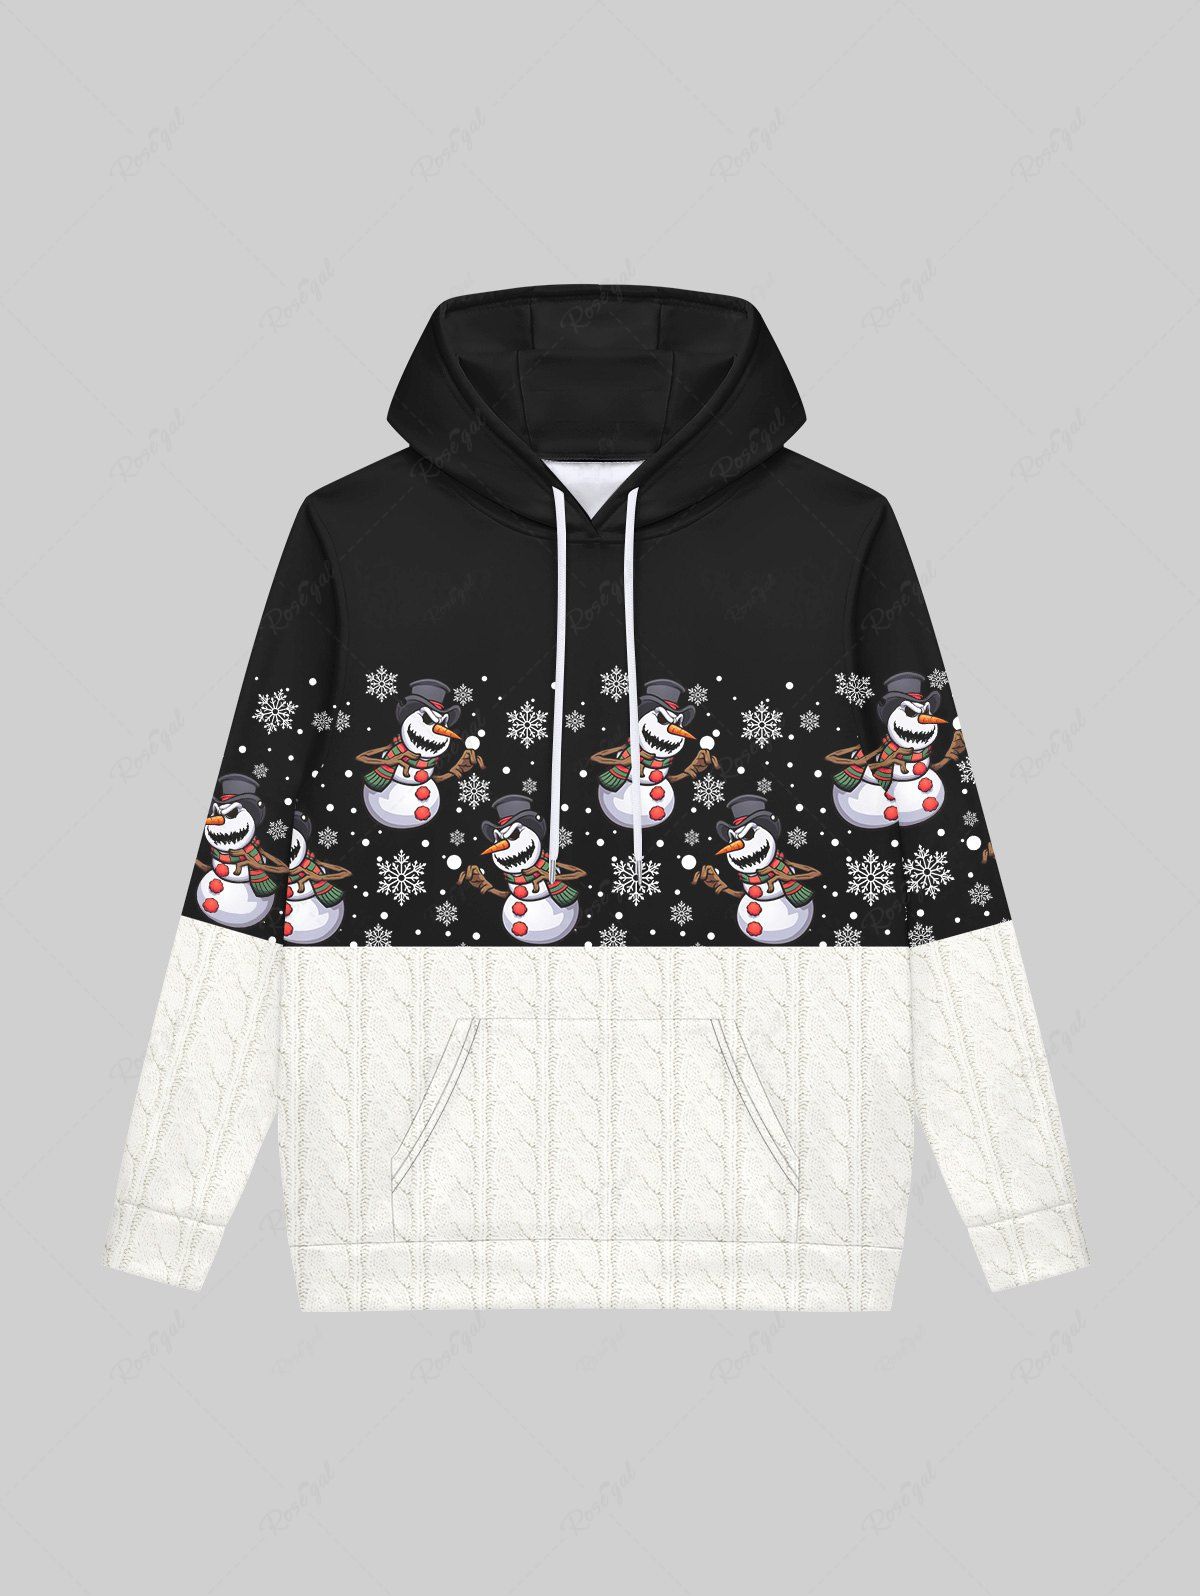 New Gothic Christmas Colorblock Snowman Sowflake Cable Knit 3D Print Pockets Drawstring Hoodie For Men  